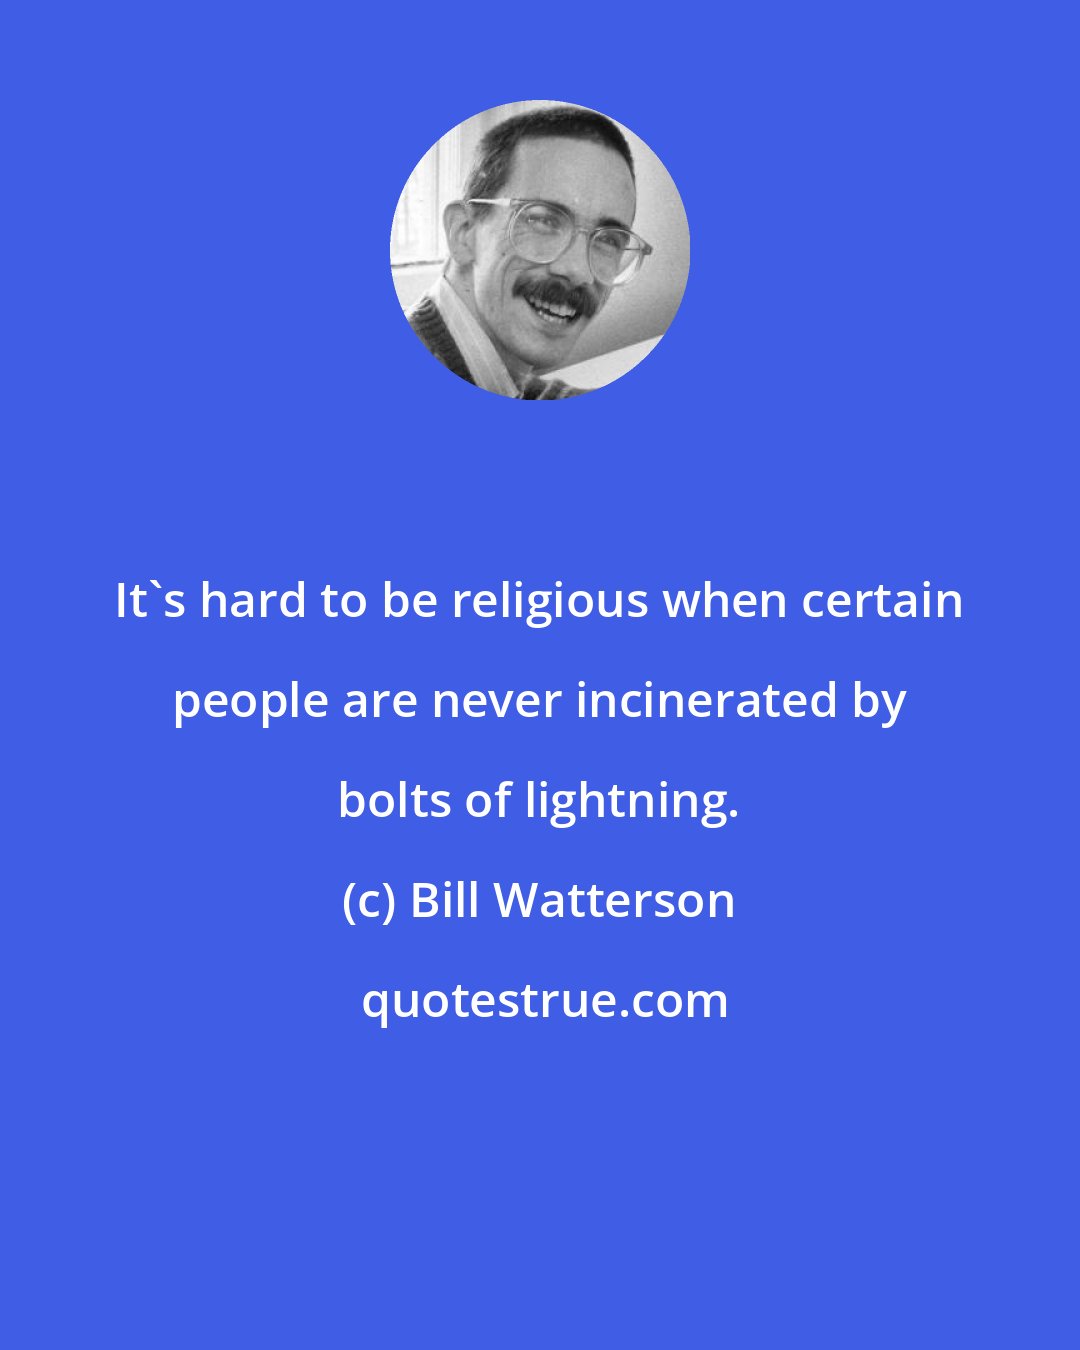 Bill Watterson: It's hard to be religious when certain people are never incinerated by bolts of lightning.